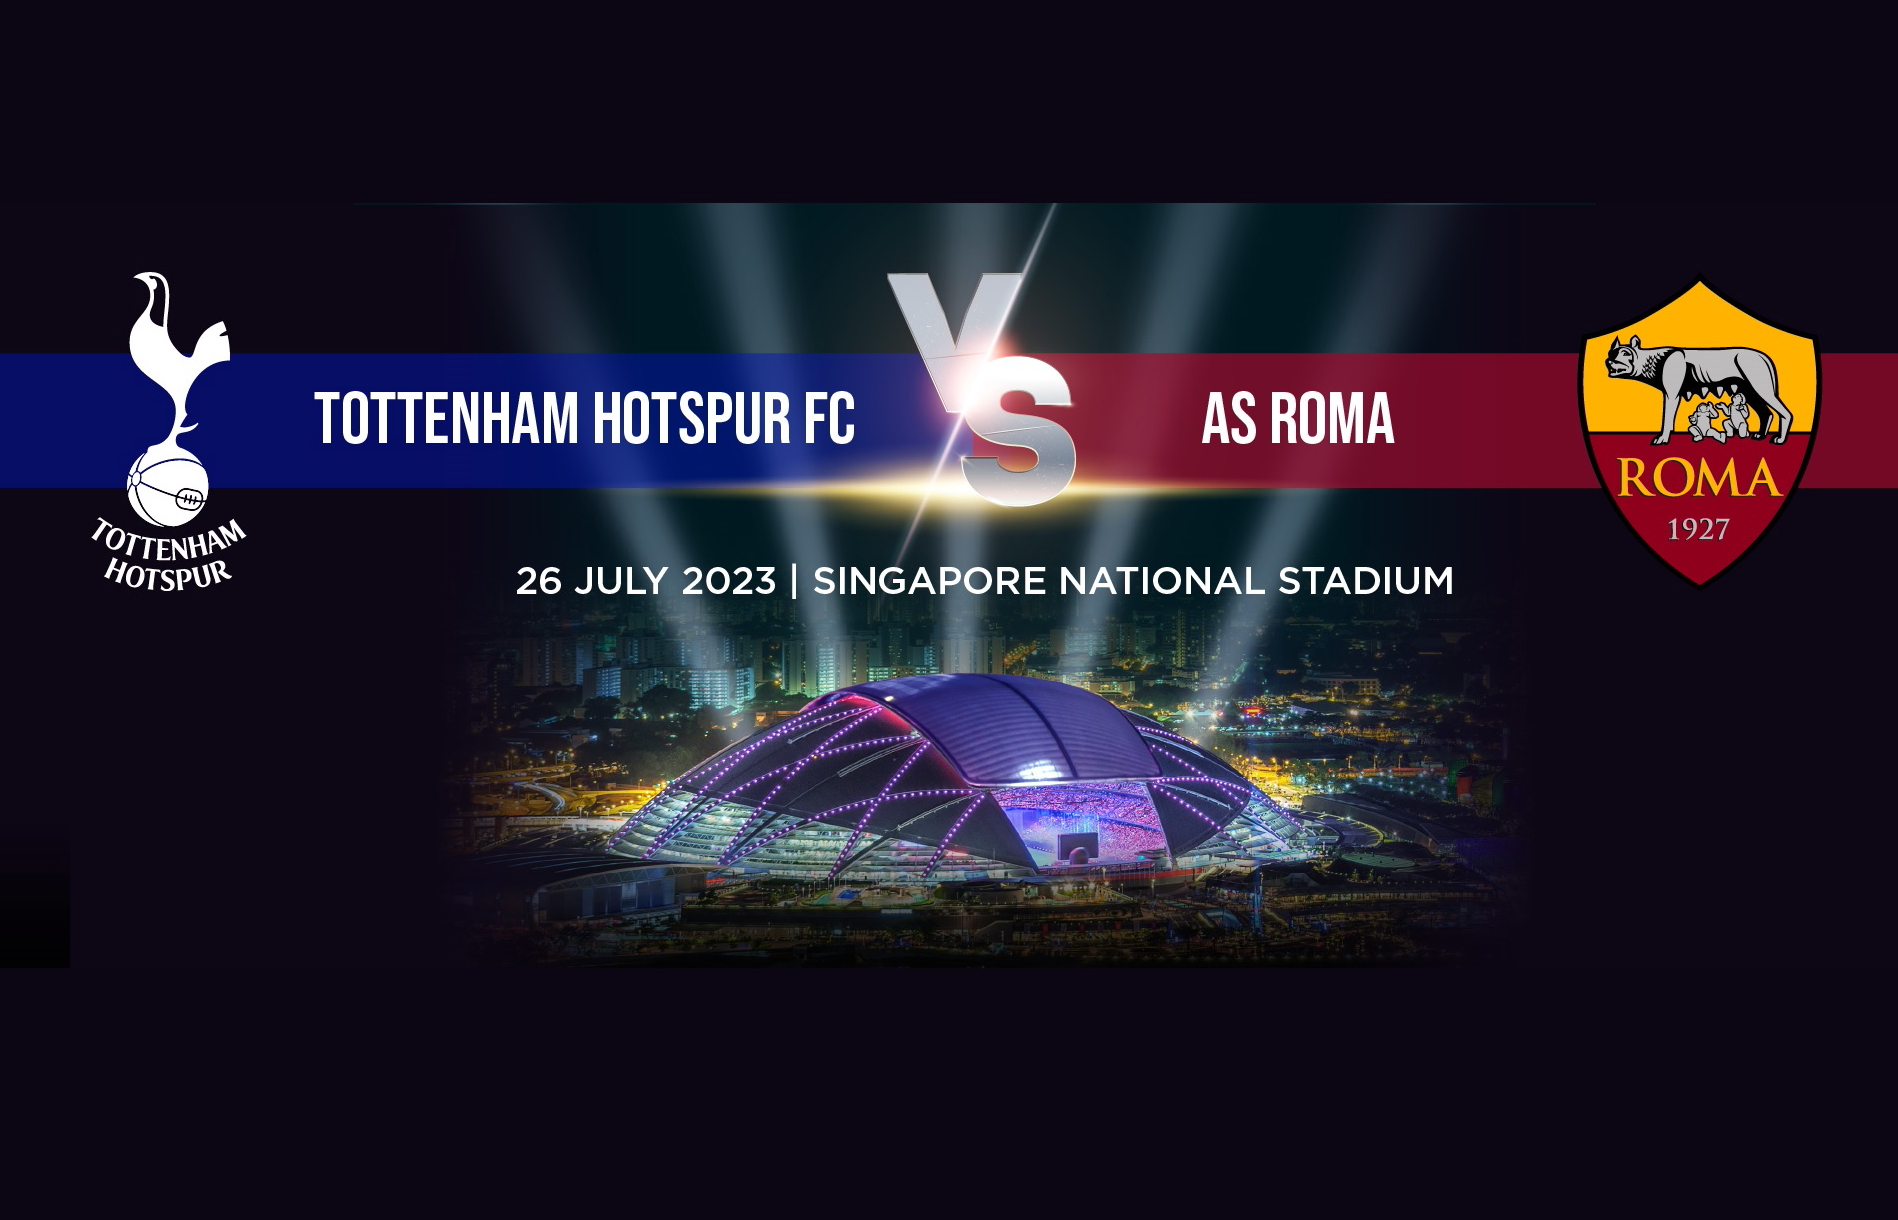 AIA Thailand joins hands with Tottenham Hotspur Football Club to